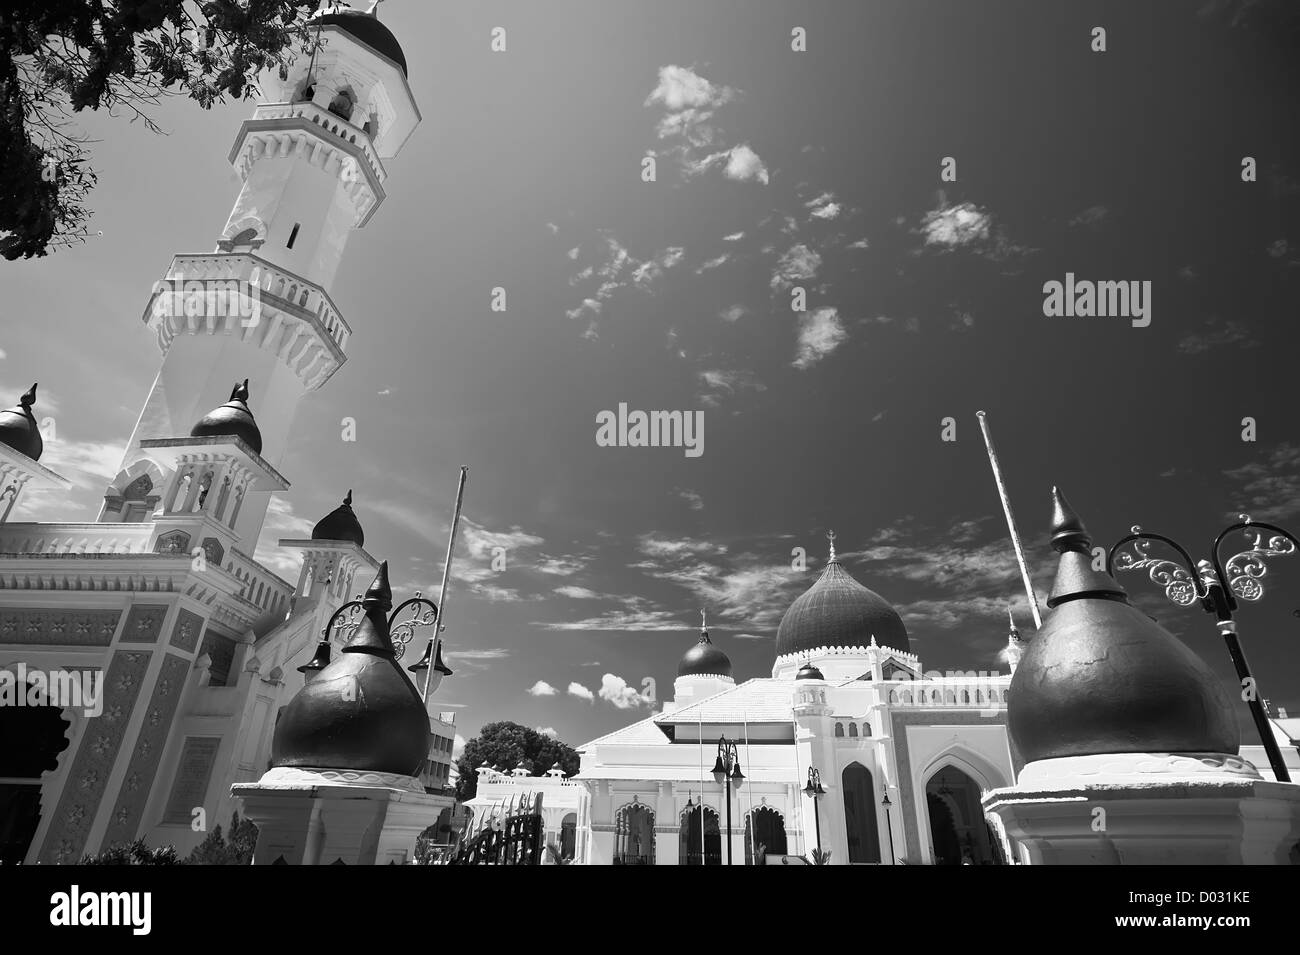 Mosque with dome under sky in black and white in Peng, Malaysia, Asia. Stock Photo